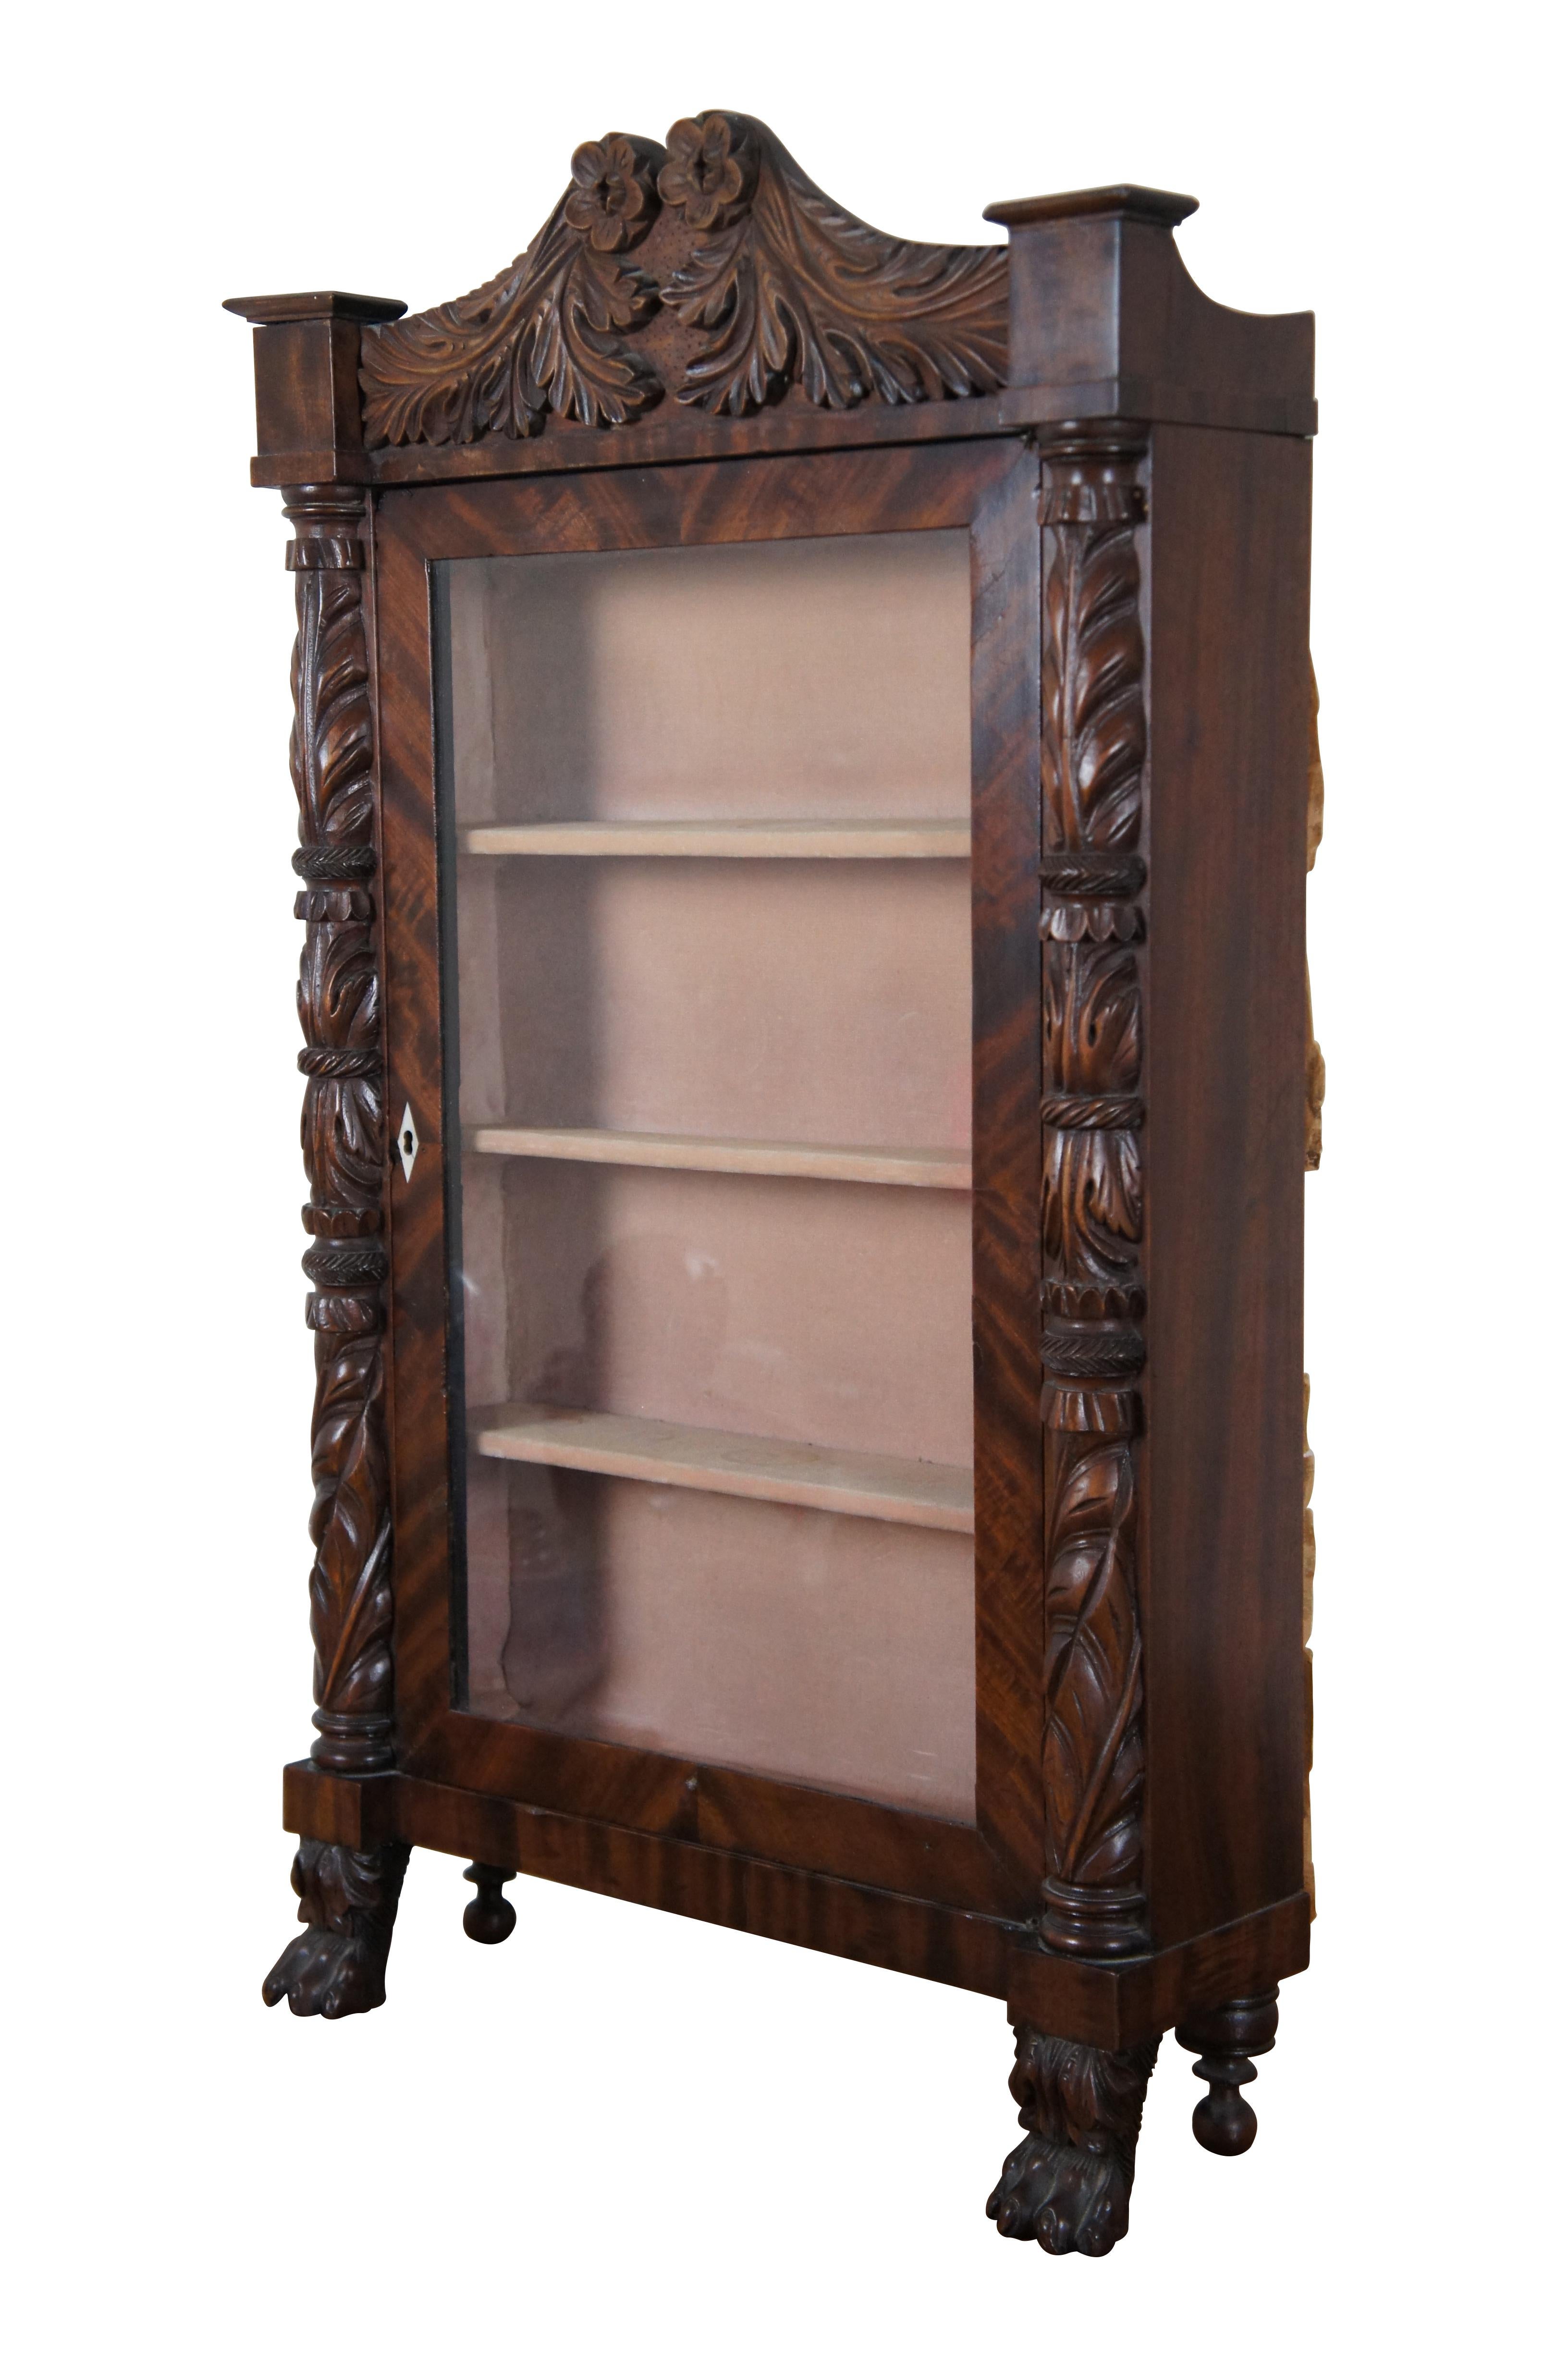 Antique American Empire carved mahogany glass front display cabinet / vitrine, heavily carved with spindle and paw / claw feet supporting foliate pillars that lead to a scrolled floral pediment. The glass door features a white diamond shaped inlaid